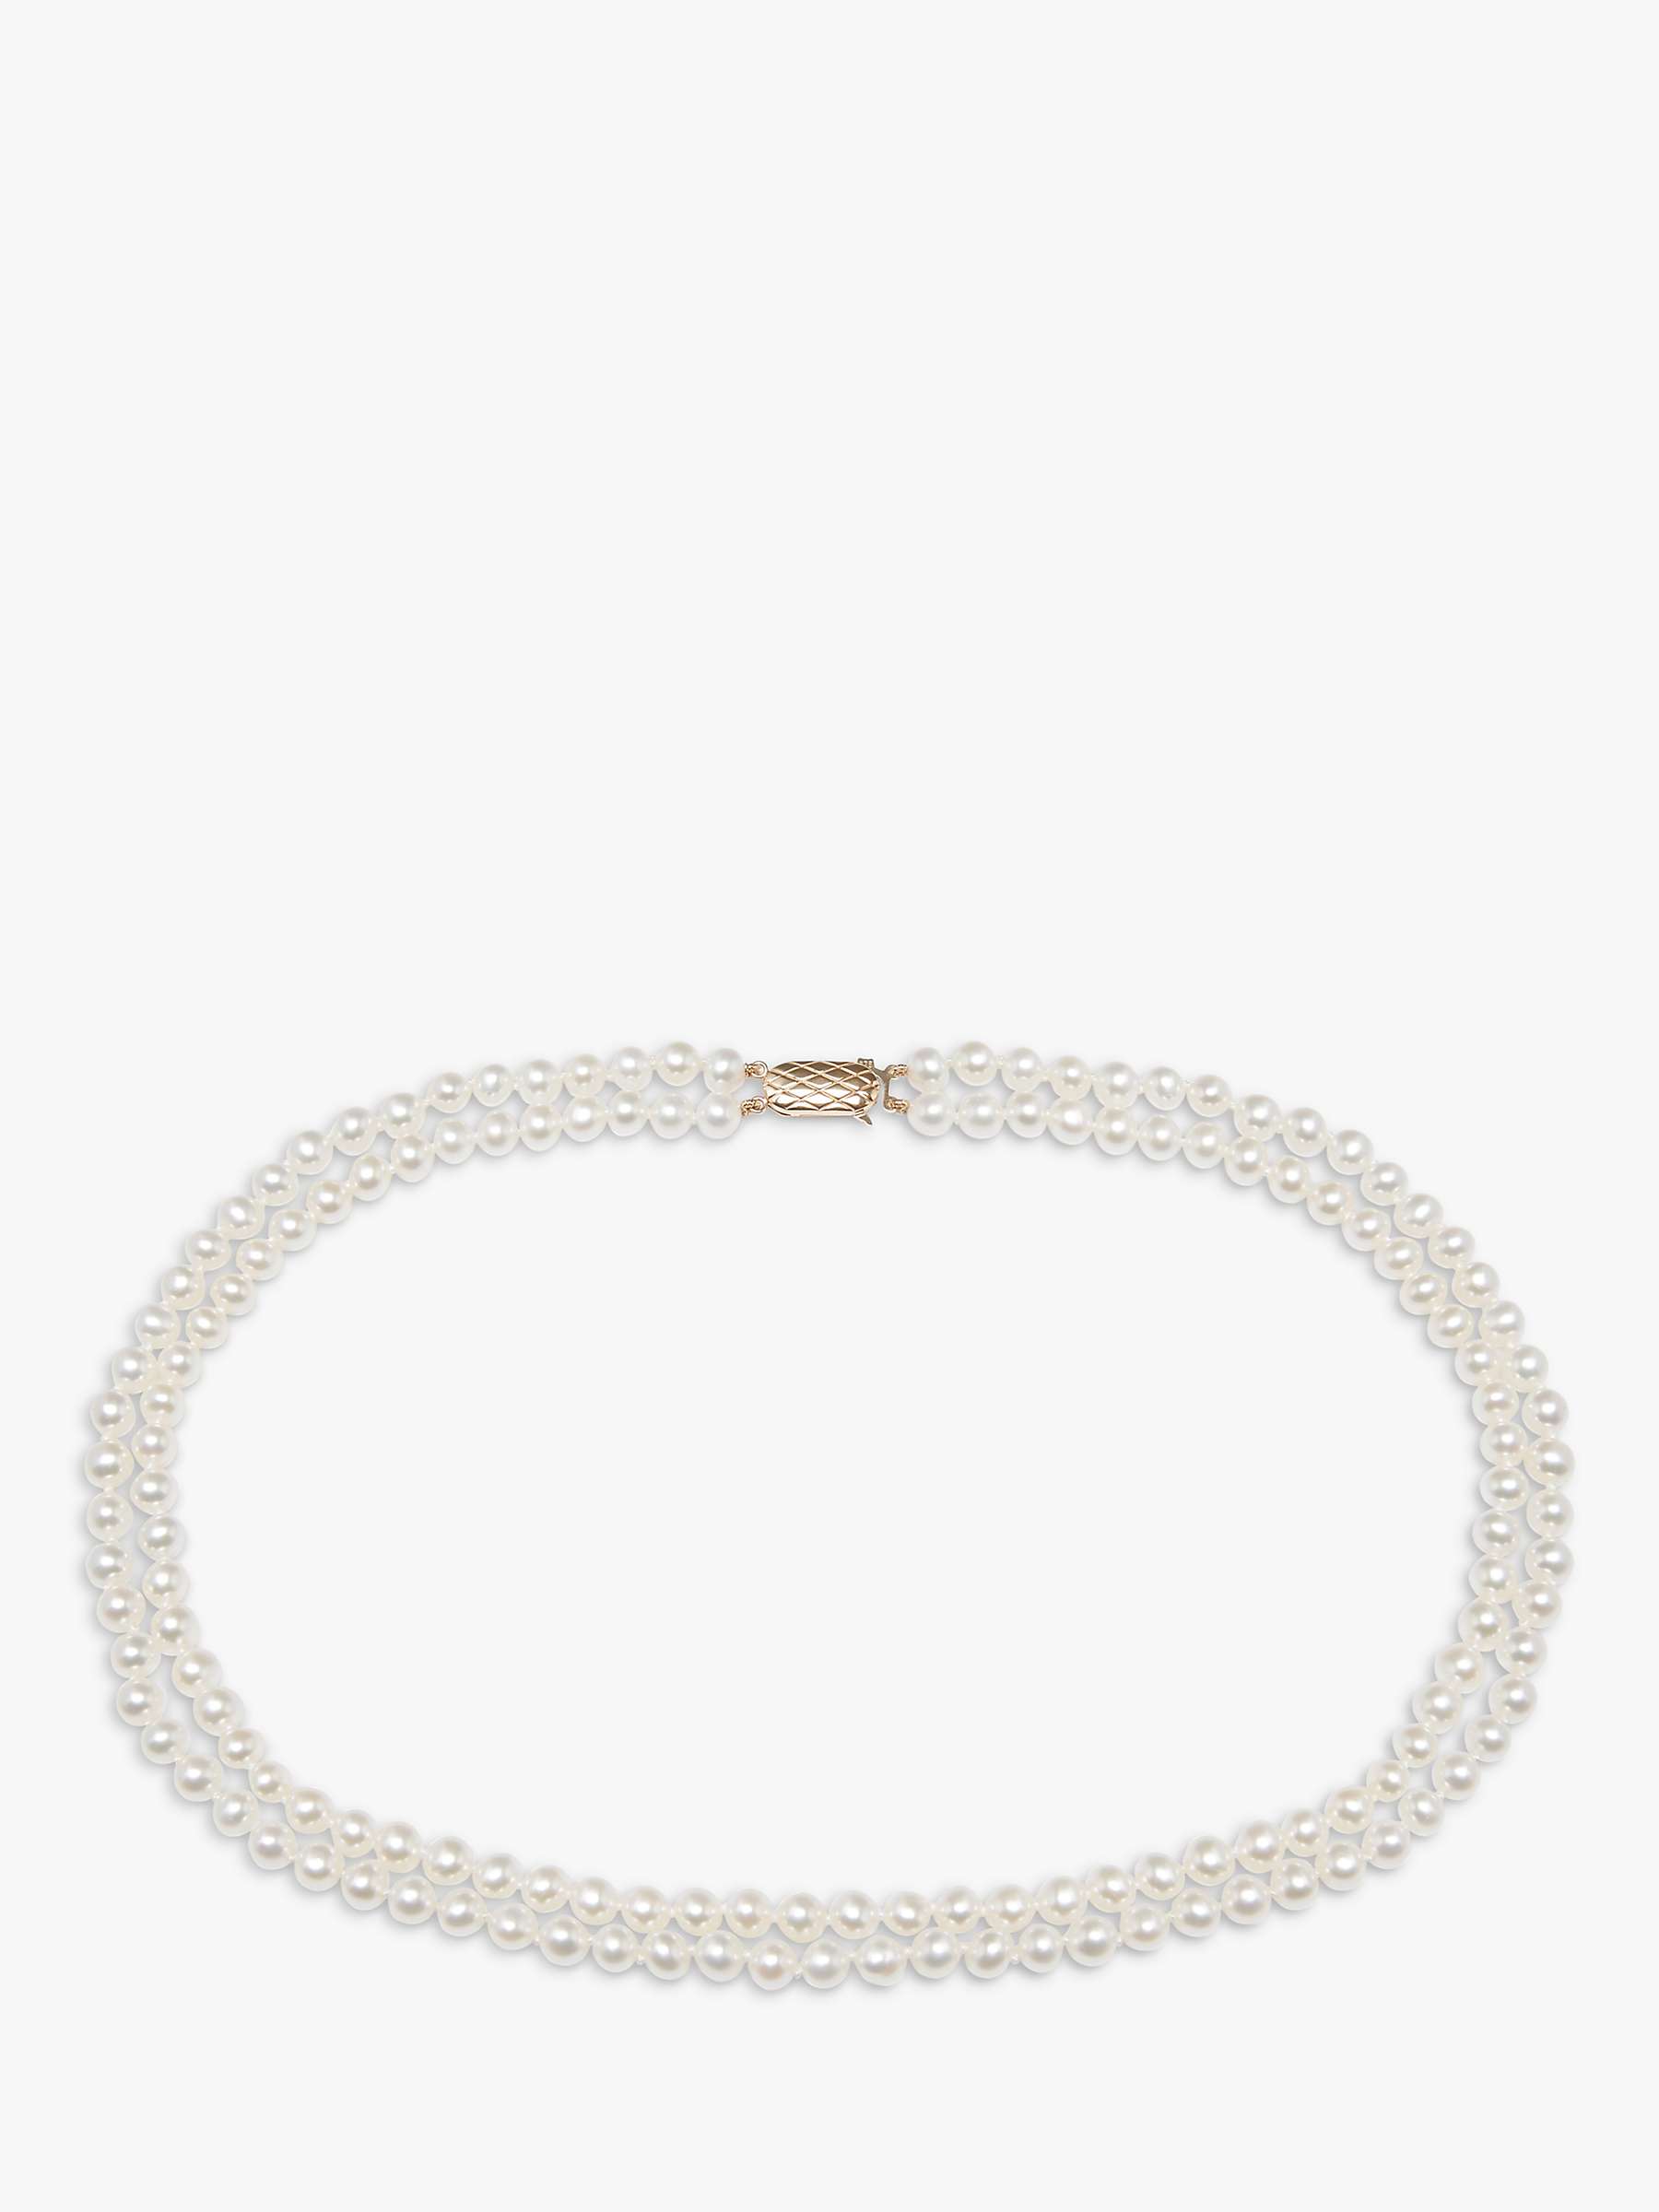 Buy A B Davis Double Row Cultured Pearl Necklace, Yellow Gold Online at johnlewis.com